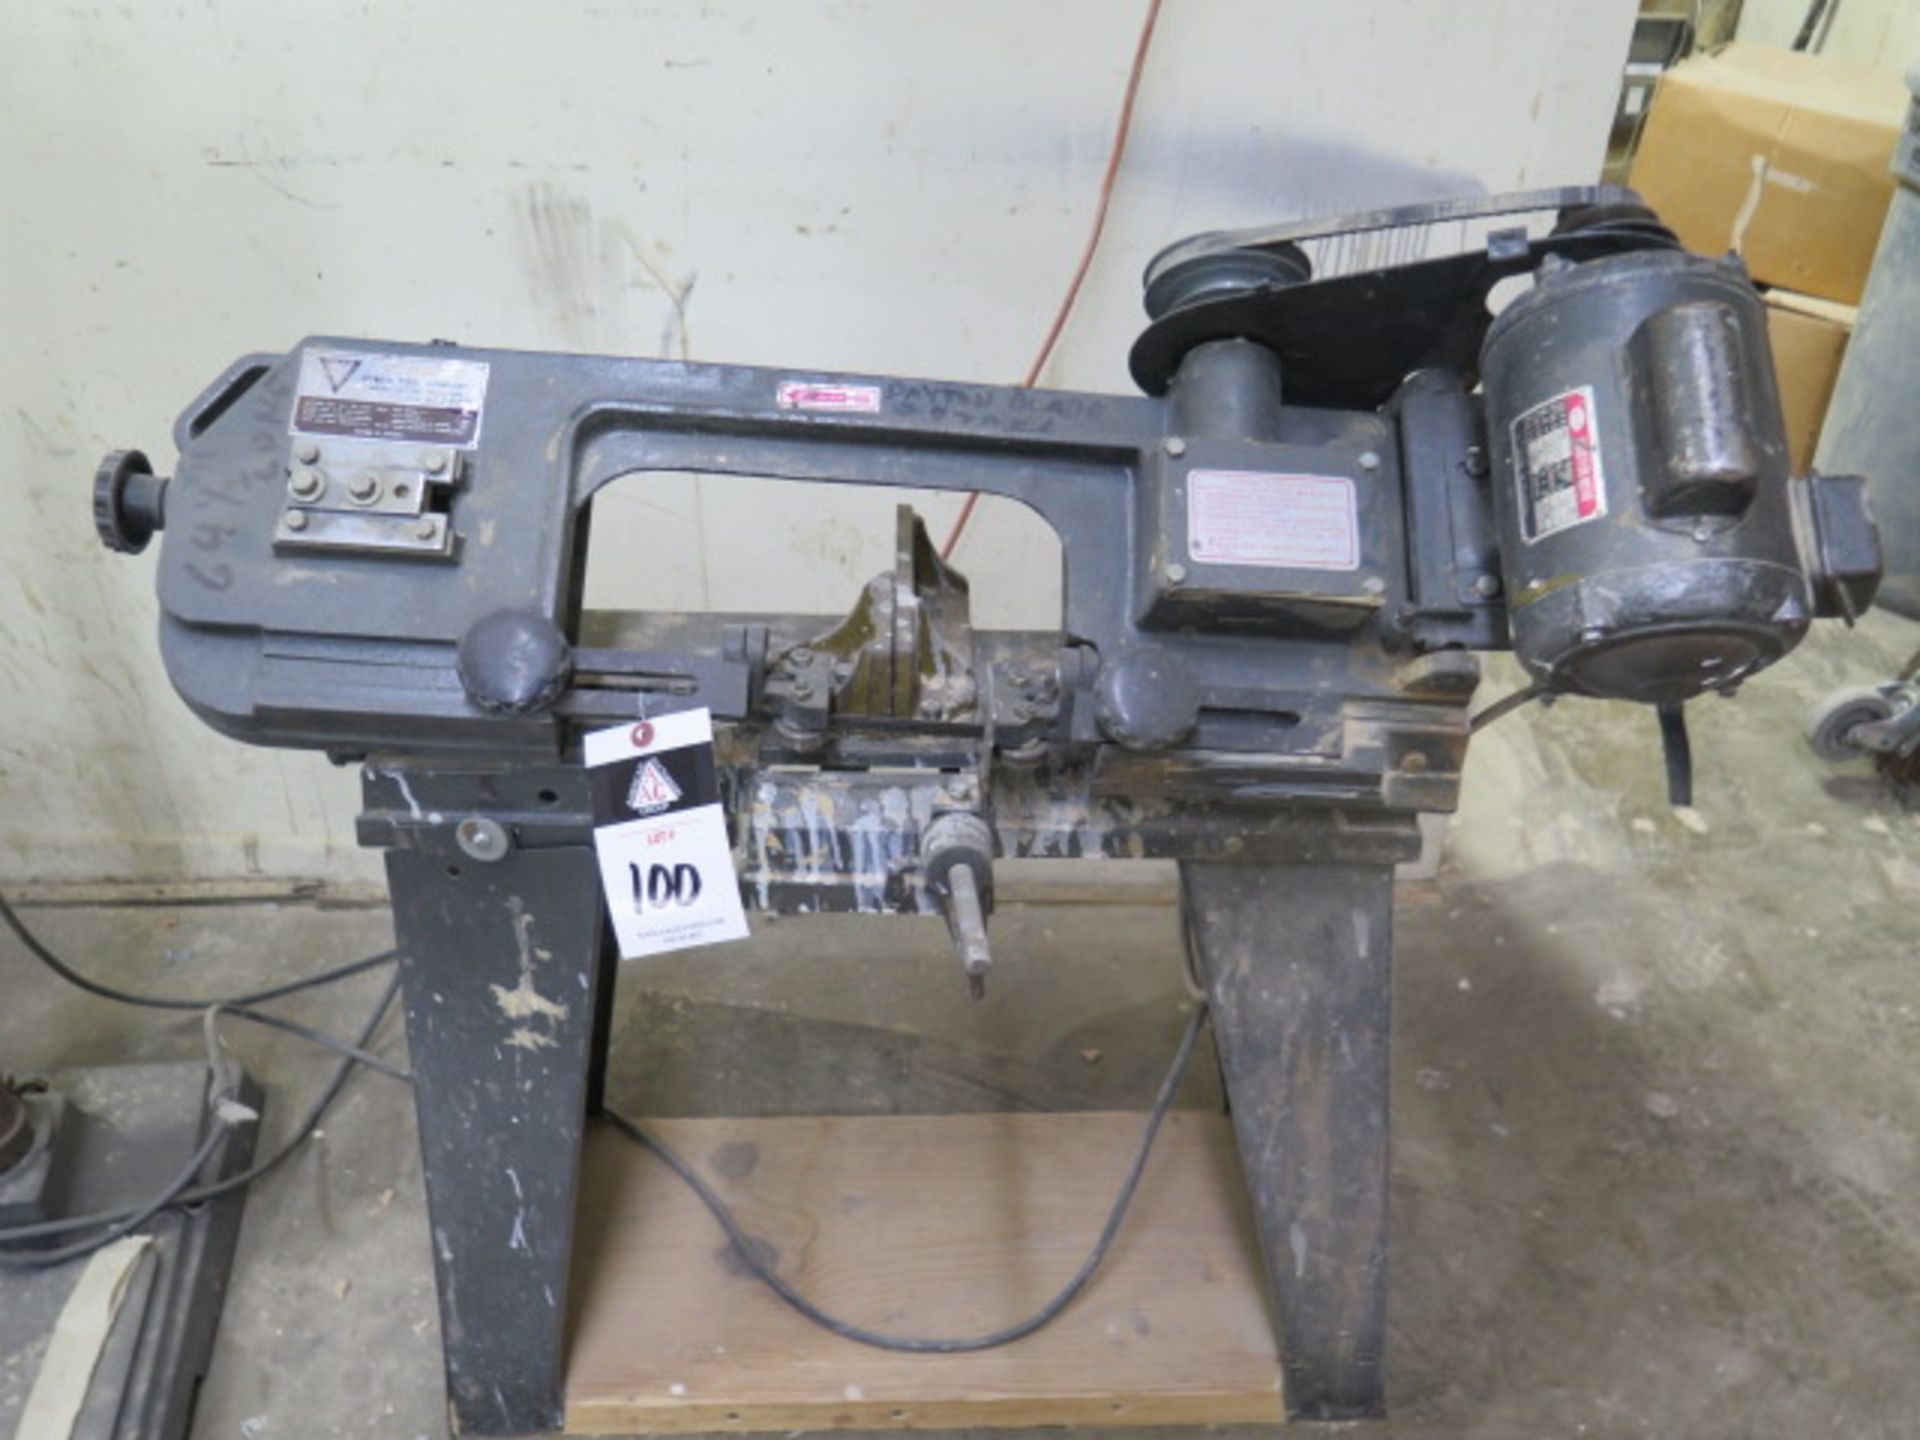 Chicago 4 ½” Horizontal Band Saw w/ 3-Speeds, Manual Clamping, Work Stop (SOLD AS-IS - NO WARRANTY)